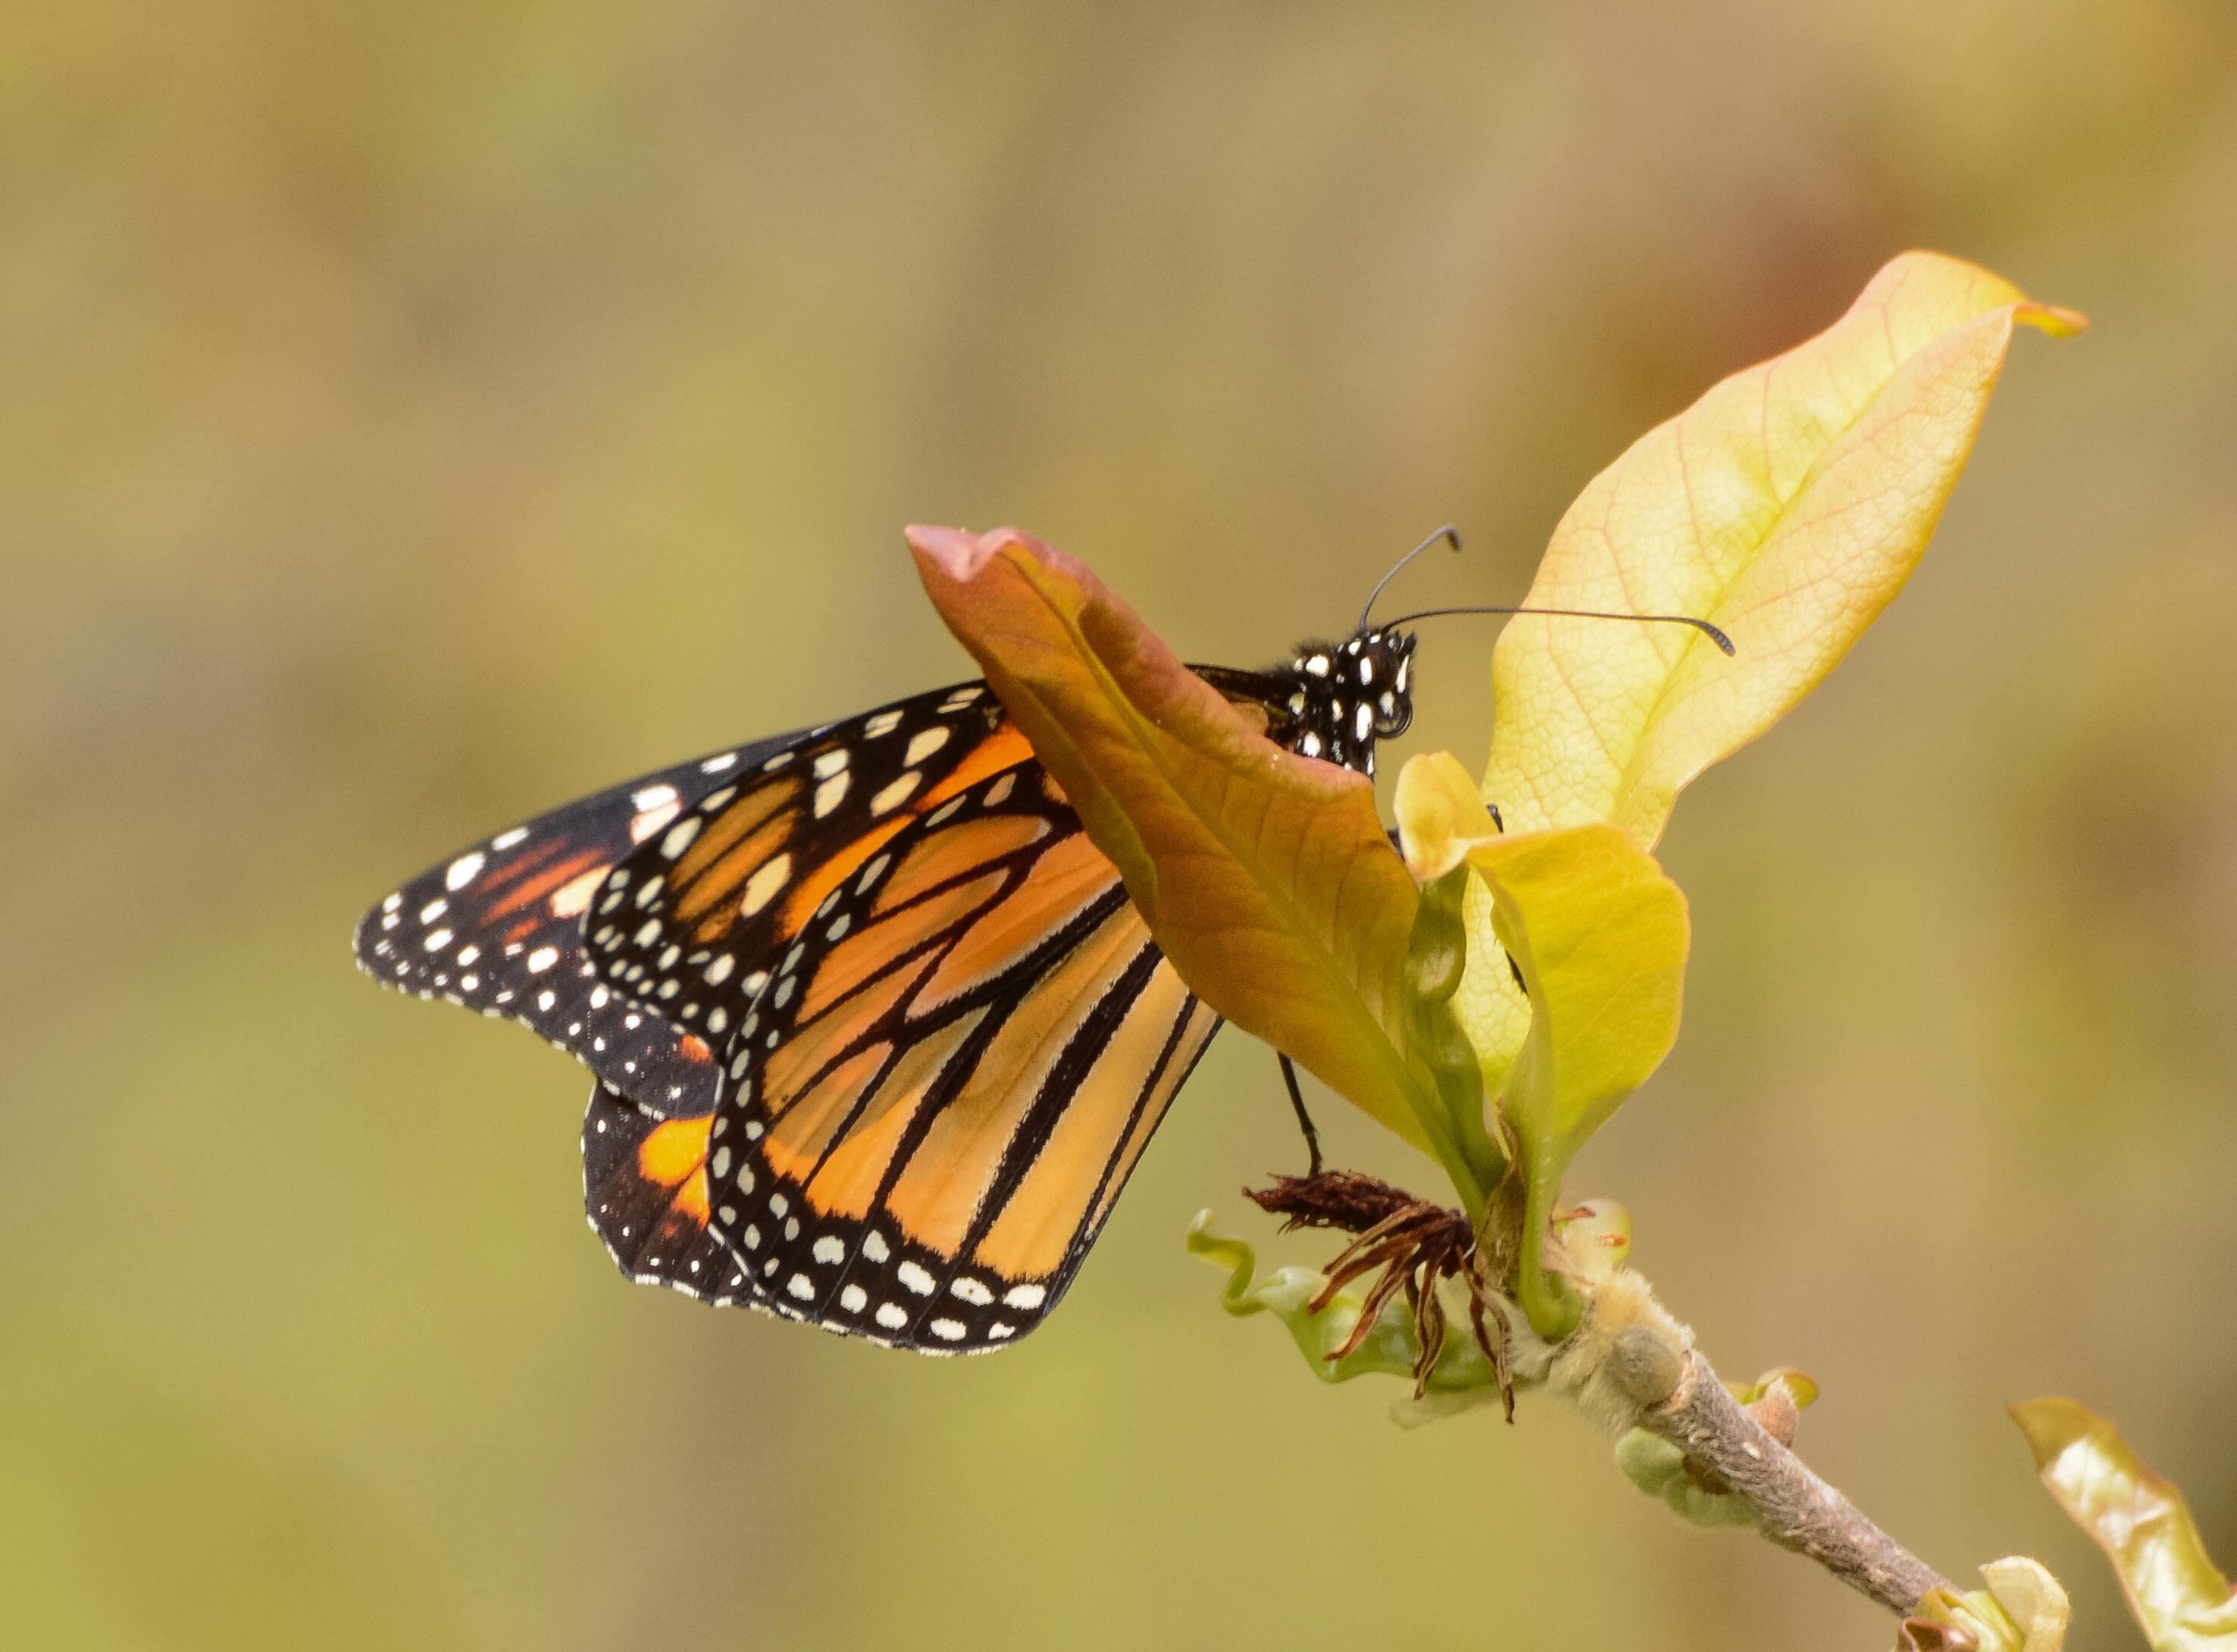 Surprise Sighting of a Monarch Butterfly in New Jersey